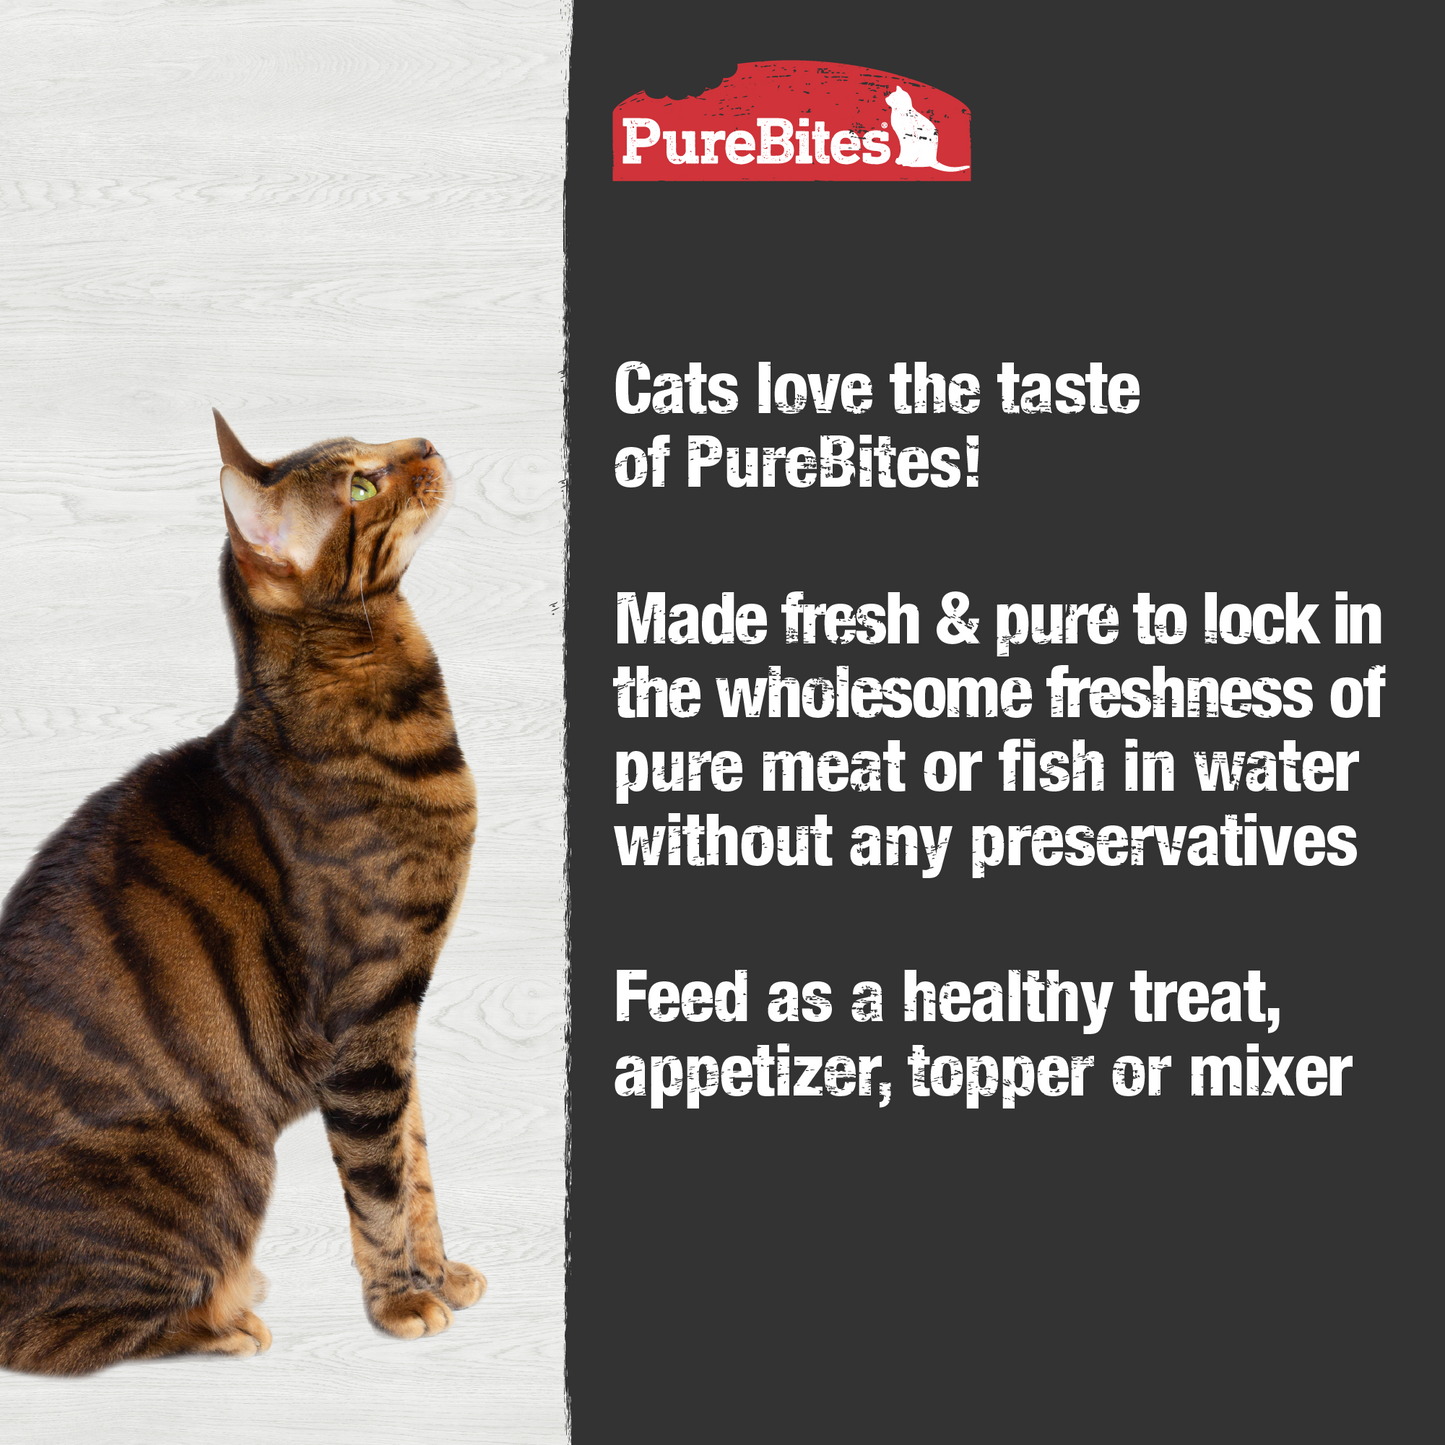 Made fresh & pure means more protein and nutrients packed into every tray. The chicken in our wet mixers is delicately steamed to help preserve the ingredient's taste, and nutrition, and mirror a cat’s ancestral diet